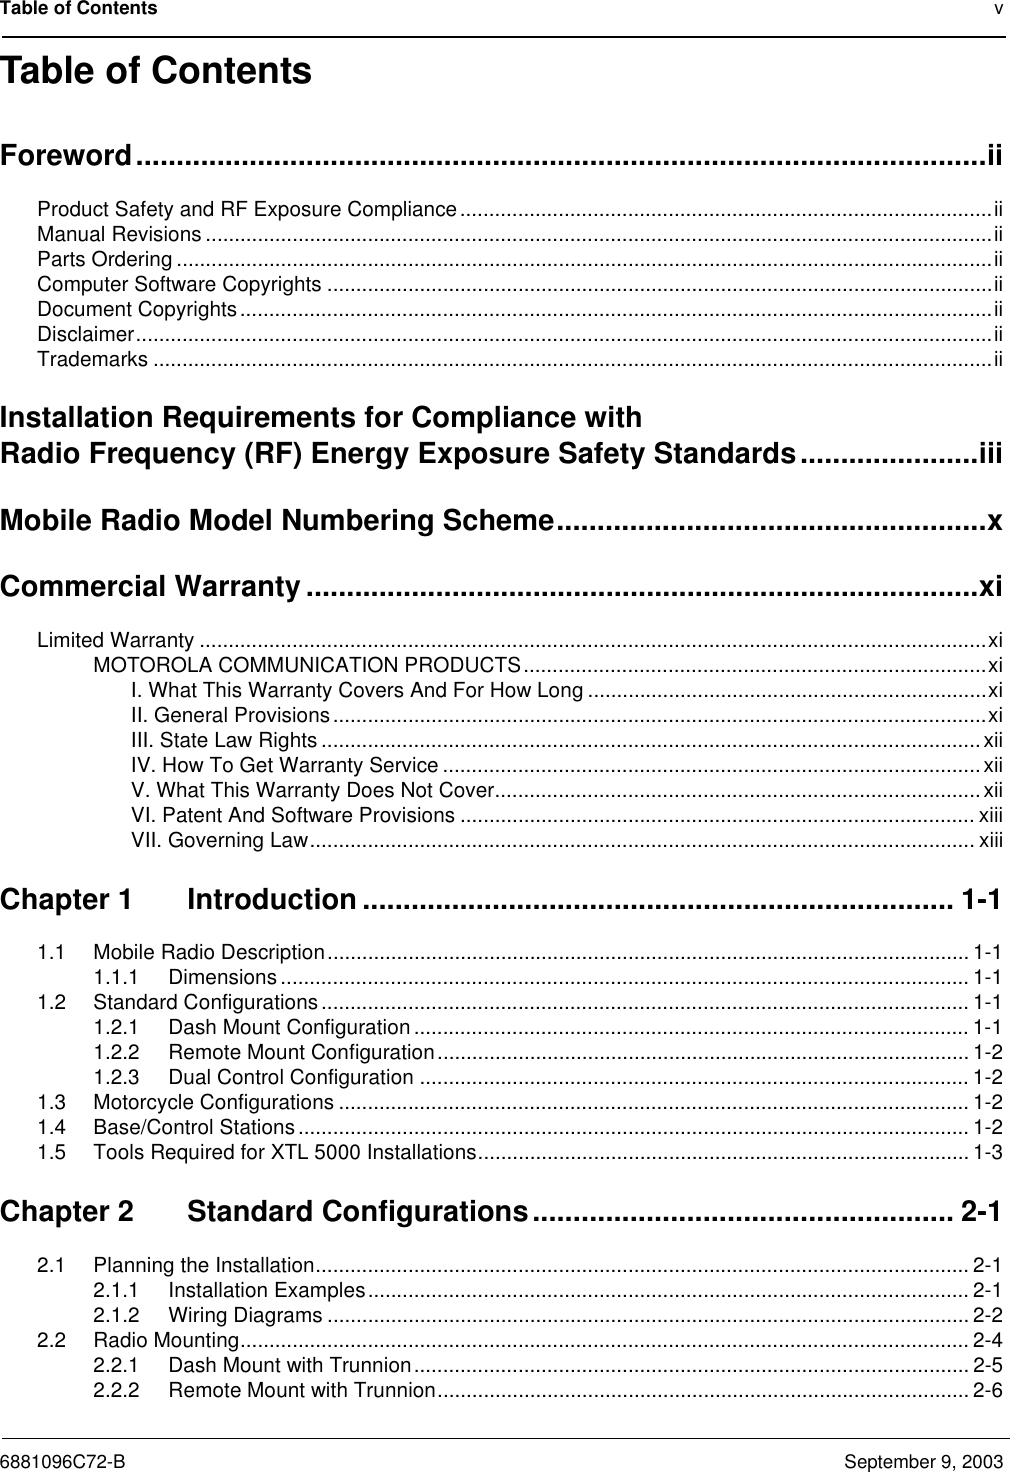 Table of Contents v6881096C72-B September 9, 2003Table of ContentsForeword.........................................................................................................iiProduct Safety and RF Exposure Compliance............................................................................................iiManual Revisions ........................................................................................................................................iiParts Ordering .............................................................................................................................................iiComputer Software Copyrights ...................................................................................................................iiDocument Copyrights..................................................................................................................................iiDisclaimer....................................................................................................................................................iiTrademarks .................................................................................................................................................iiInstallation Requirements for Compliance withRadio Frequency (RF) Energy Exposure Safety Standards......................iiiMobile Radio Model Numbering Scheme.....................................................xCommercial Warranty ...................................................................................xiLimited Warranty ........................................................................................................................................xiMOTOROLA COMMUNICATION PRODUCTS................................................................................xiI. What This Warranty Covers And For How Long .....................................................................xiII. General Provisions.................................................................................................................xiIII. State Law Rights ..................................................................................................................xiiIV. How To Get Warranty Service .............................................................................................xiiV. What This Warranty Does Not Cover....................................................................................xiiVI. Patent And Software Provisions ......................................................................................... xiiiVII. Governing Law................................................................................................................... xiiiChapter 1 Introduction ......................................................................... 1-11.1 Mobile Radio Description............................................................................................................... 1-11.1.1 Dimensions ....................................................................................................................... 1-11.2 Standard Configurations ................................................................................................................ 1-11.2.1 Dash Mount Configuration ................................................................................................ 1-11.2.2 Remote Mount Configuration............................................................................................ 1-21.2.3 Dual Control Configuration ............................................................................................... 1-21.3 Motorcycle Configurations ............................................................................................................. 1-21.4 Base/Control Stations.................................................................................................................... 1-21.5 Tools Required for XTL 5000 Installations..................................................................................... 1-3Chapter 2 Standard Configurations.................................................... 2-12.1 Planning the Installation................................................................................................................. 2-12.1.1 Installation Examples........................................................................................................ 2-12.1.2 Wiring Diagrams ............................................................................................................... 2-22.2 Radio Mounting.............................................................................................................................. 2-42.2.1 Dash Mount with Trunnion................................................................................................ 2-52.2.2 Remote Mount with Trunnion............................................................................................ 2-6